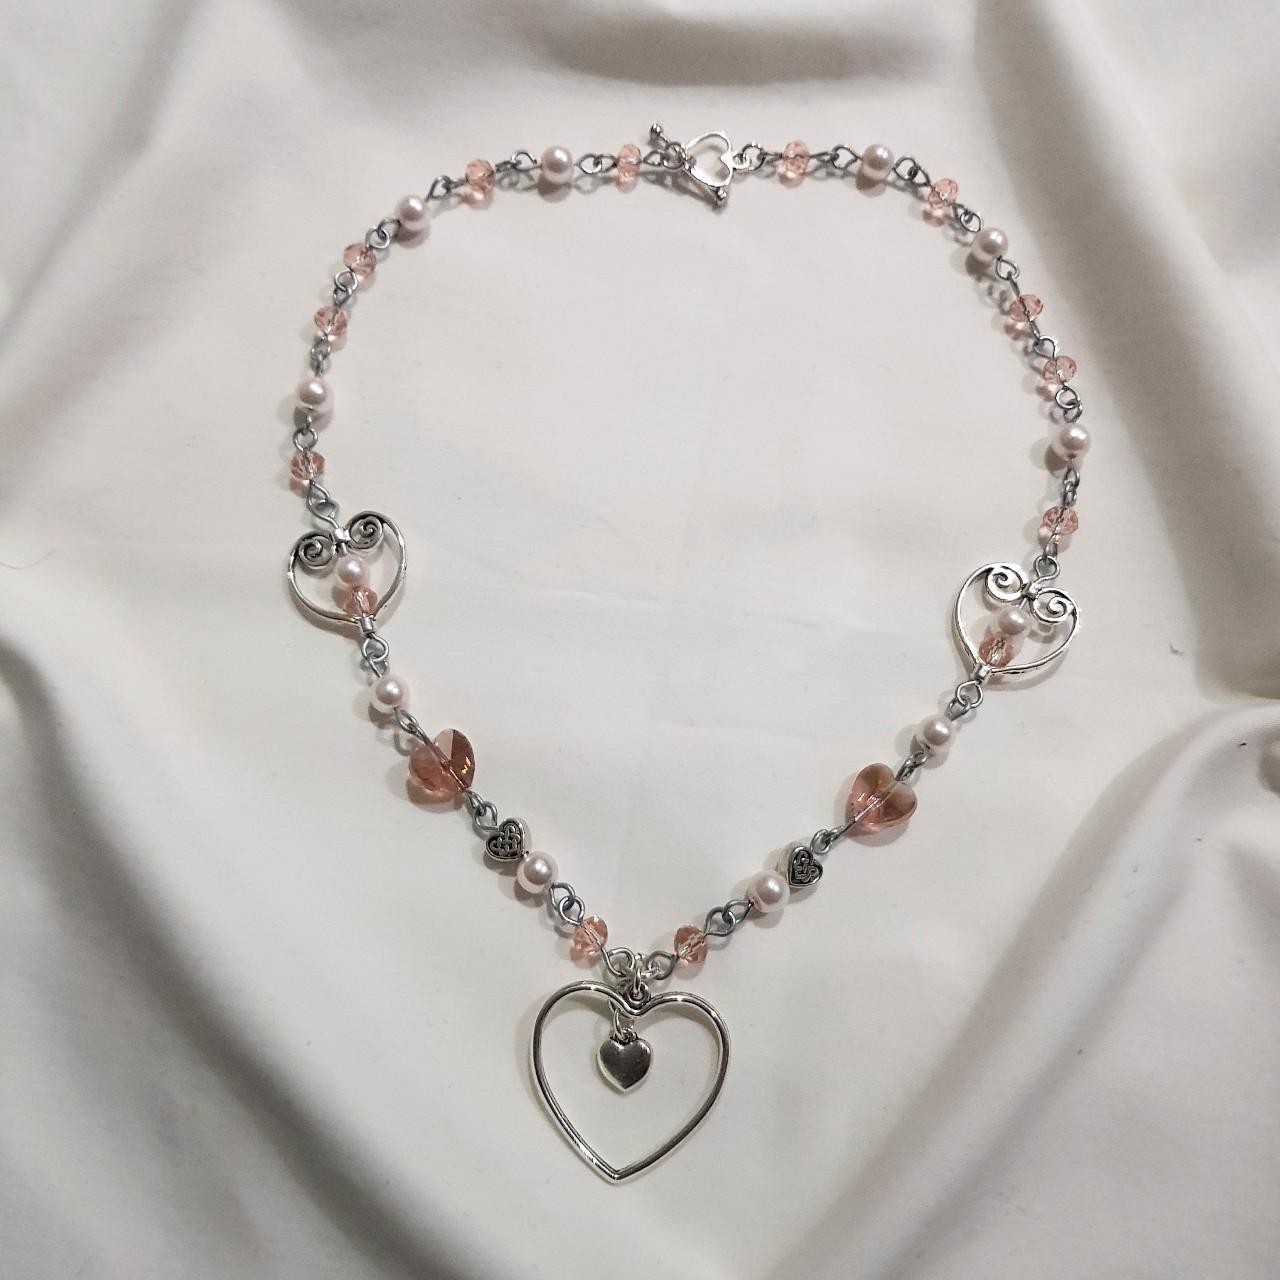 Women's Pink and Silver Jewellery | Depop